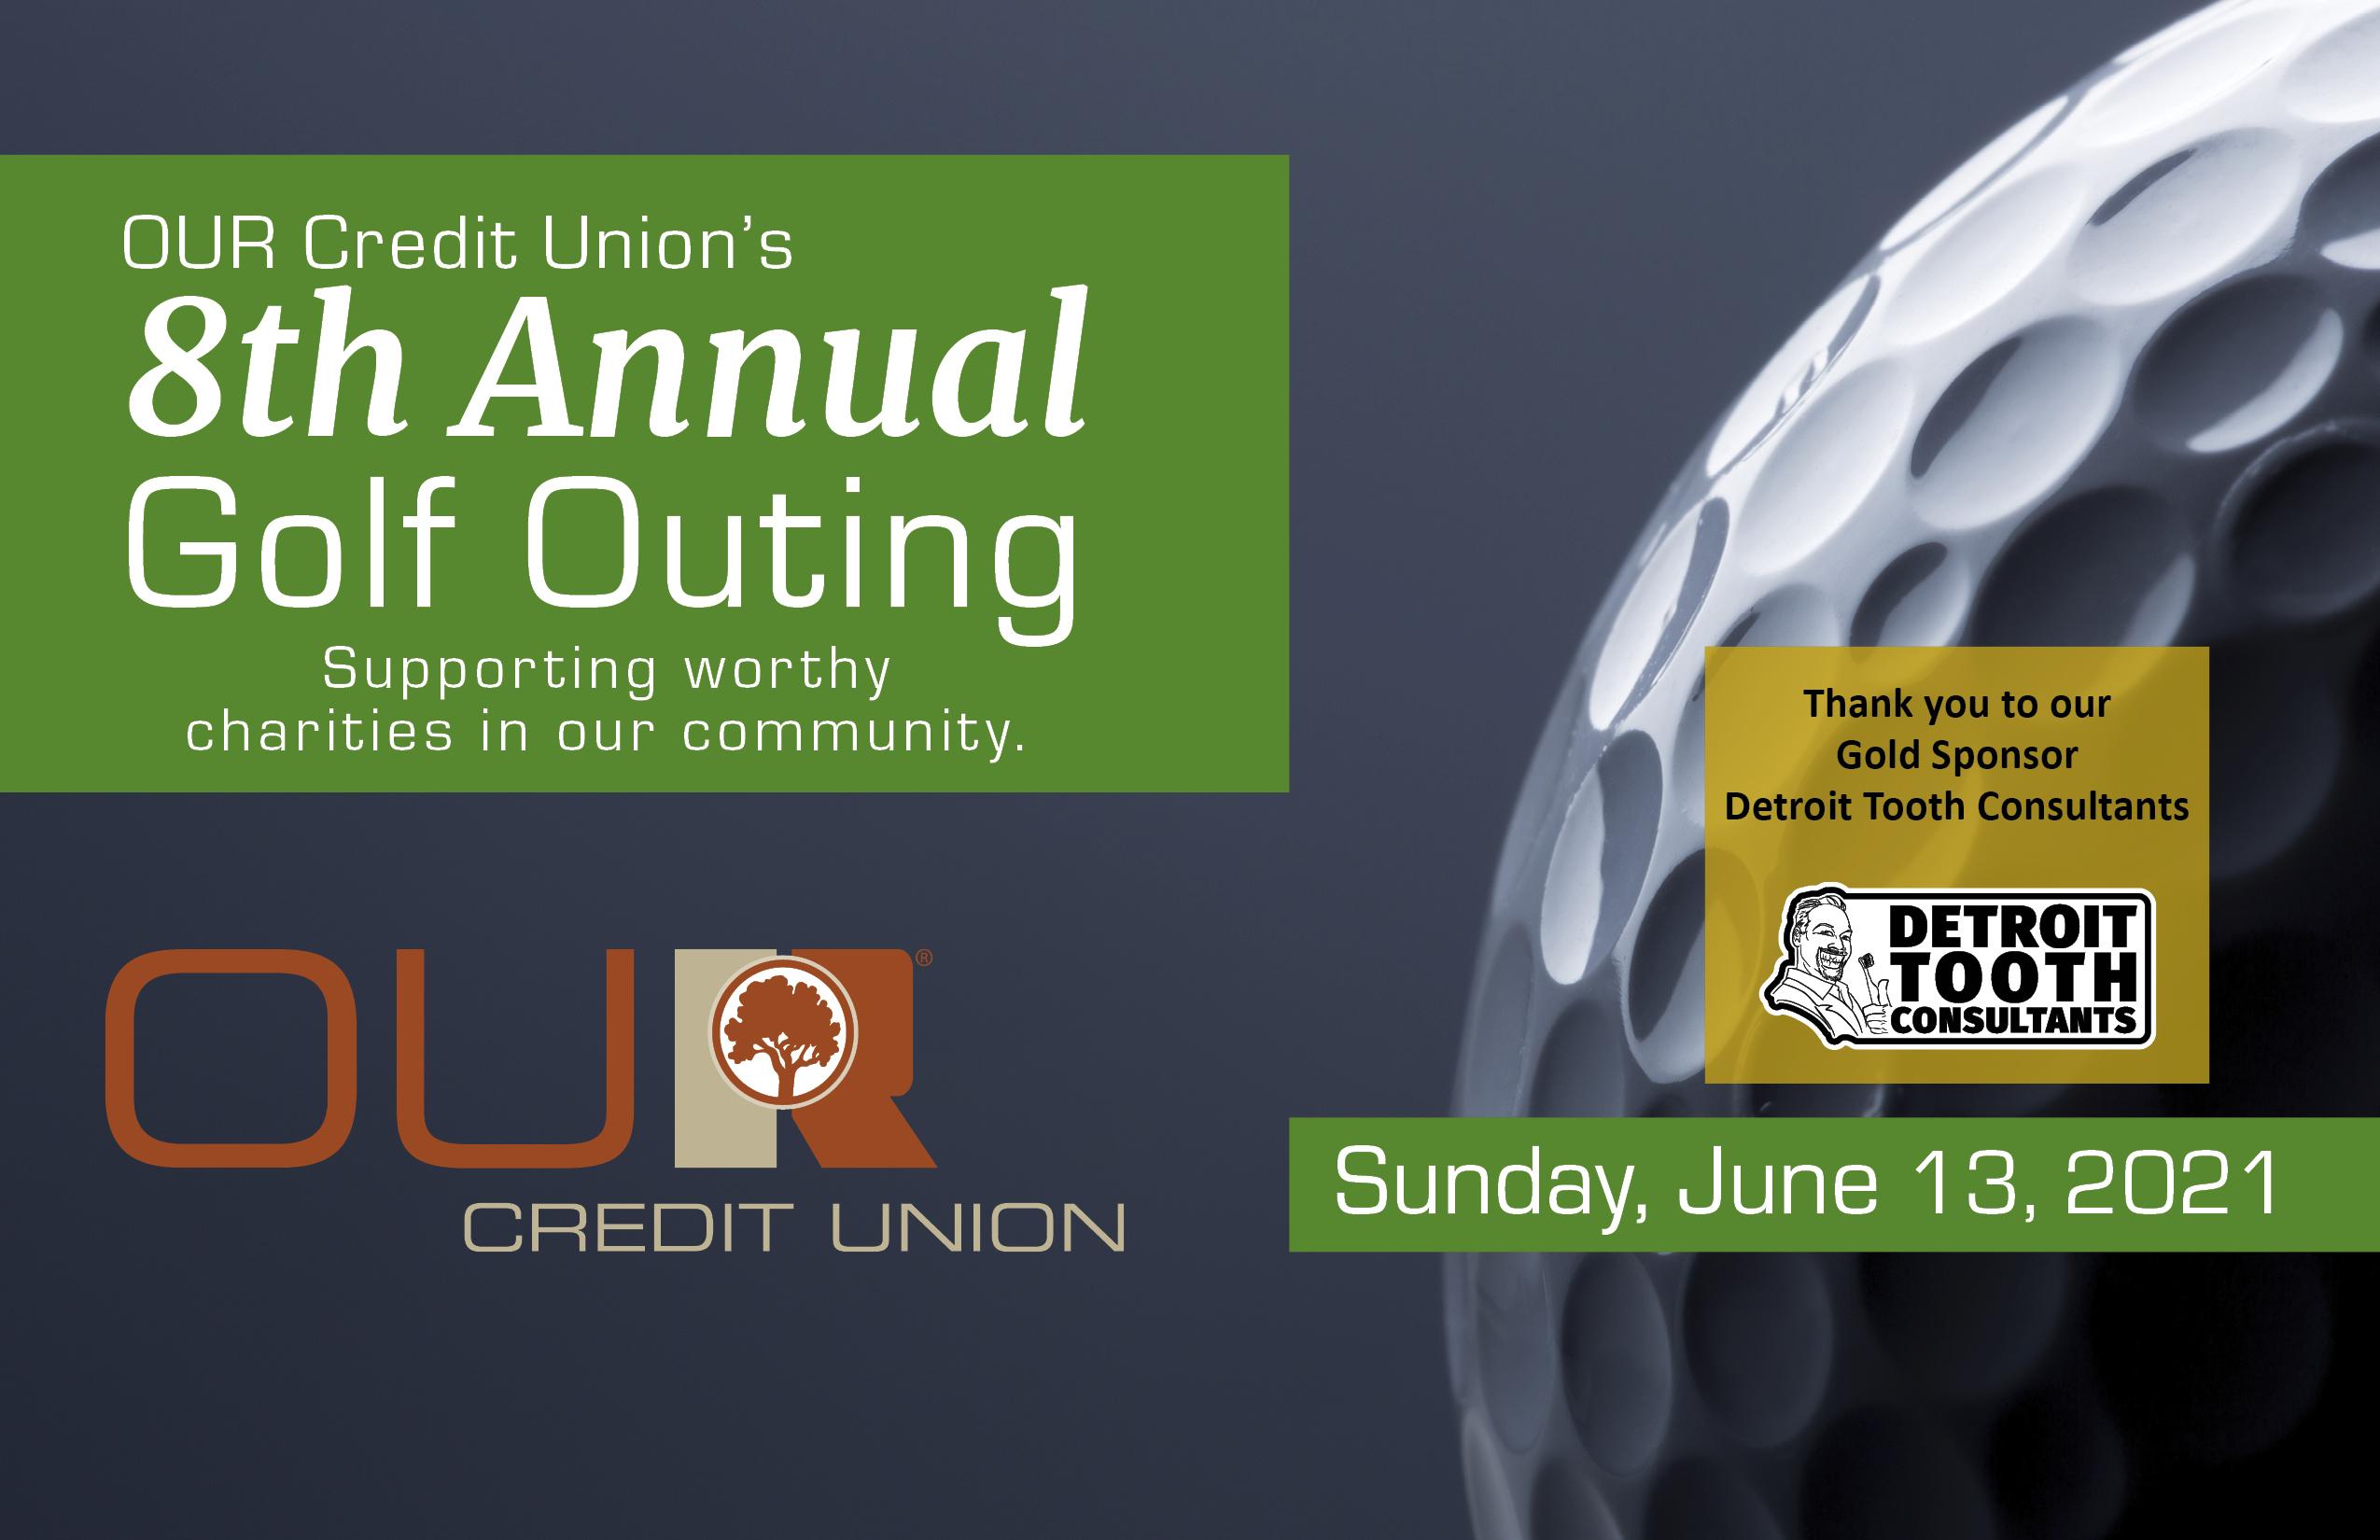 OUR 8th Annual Golf Outing